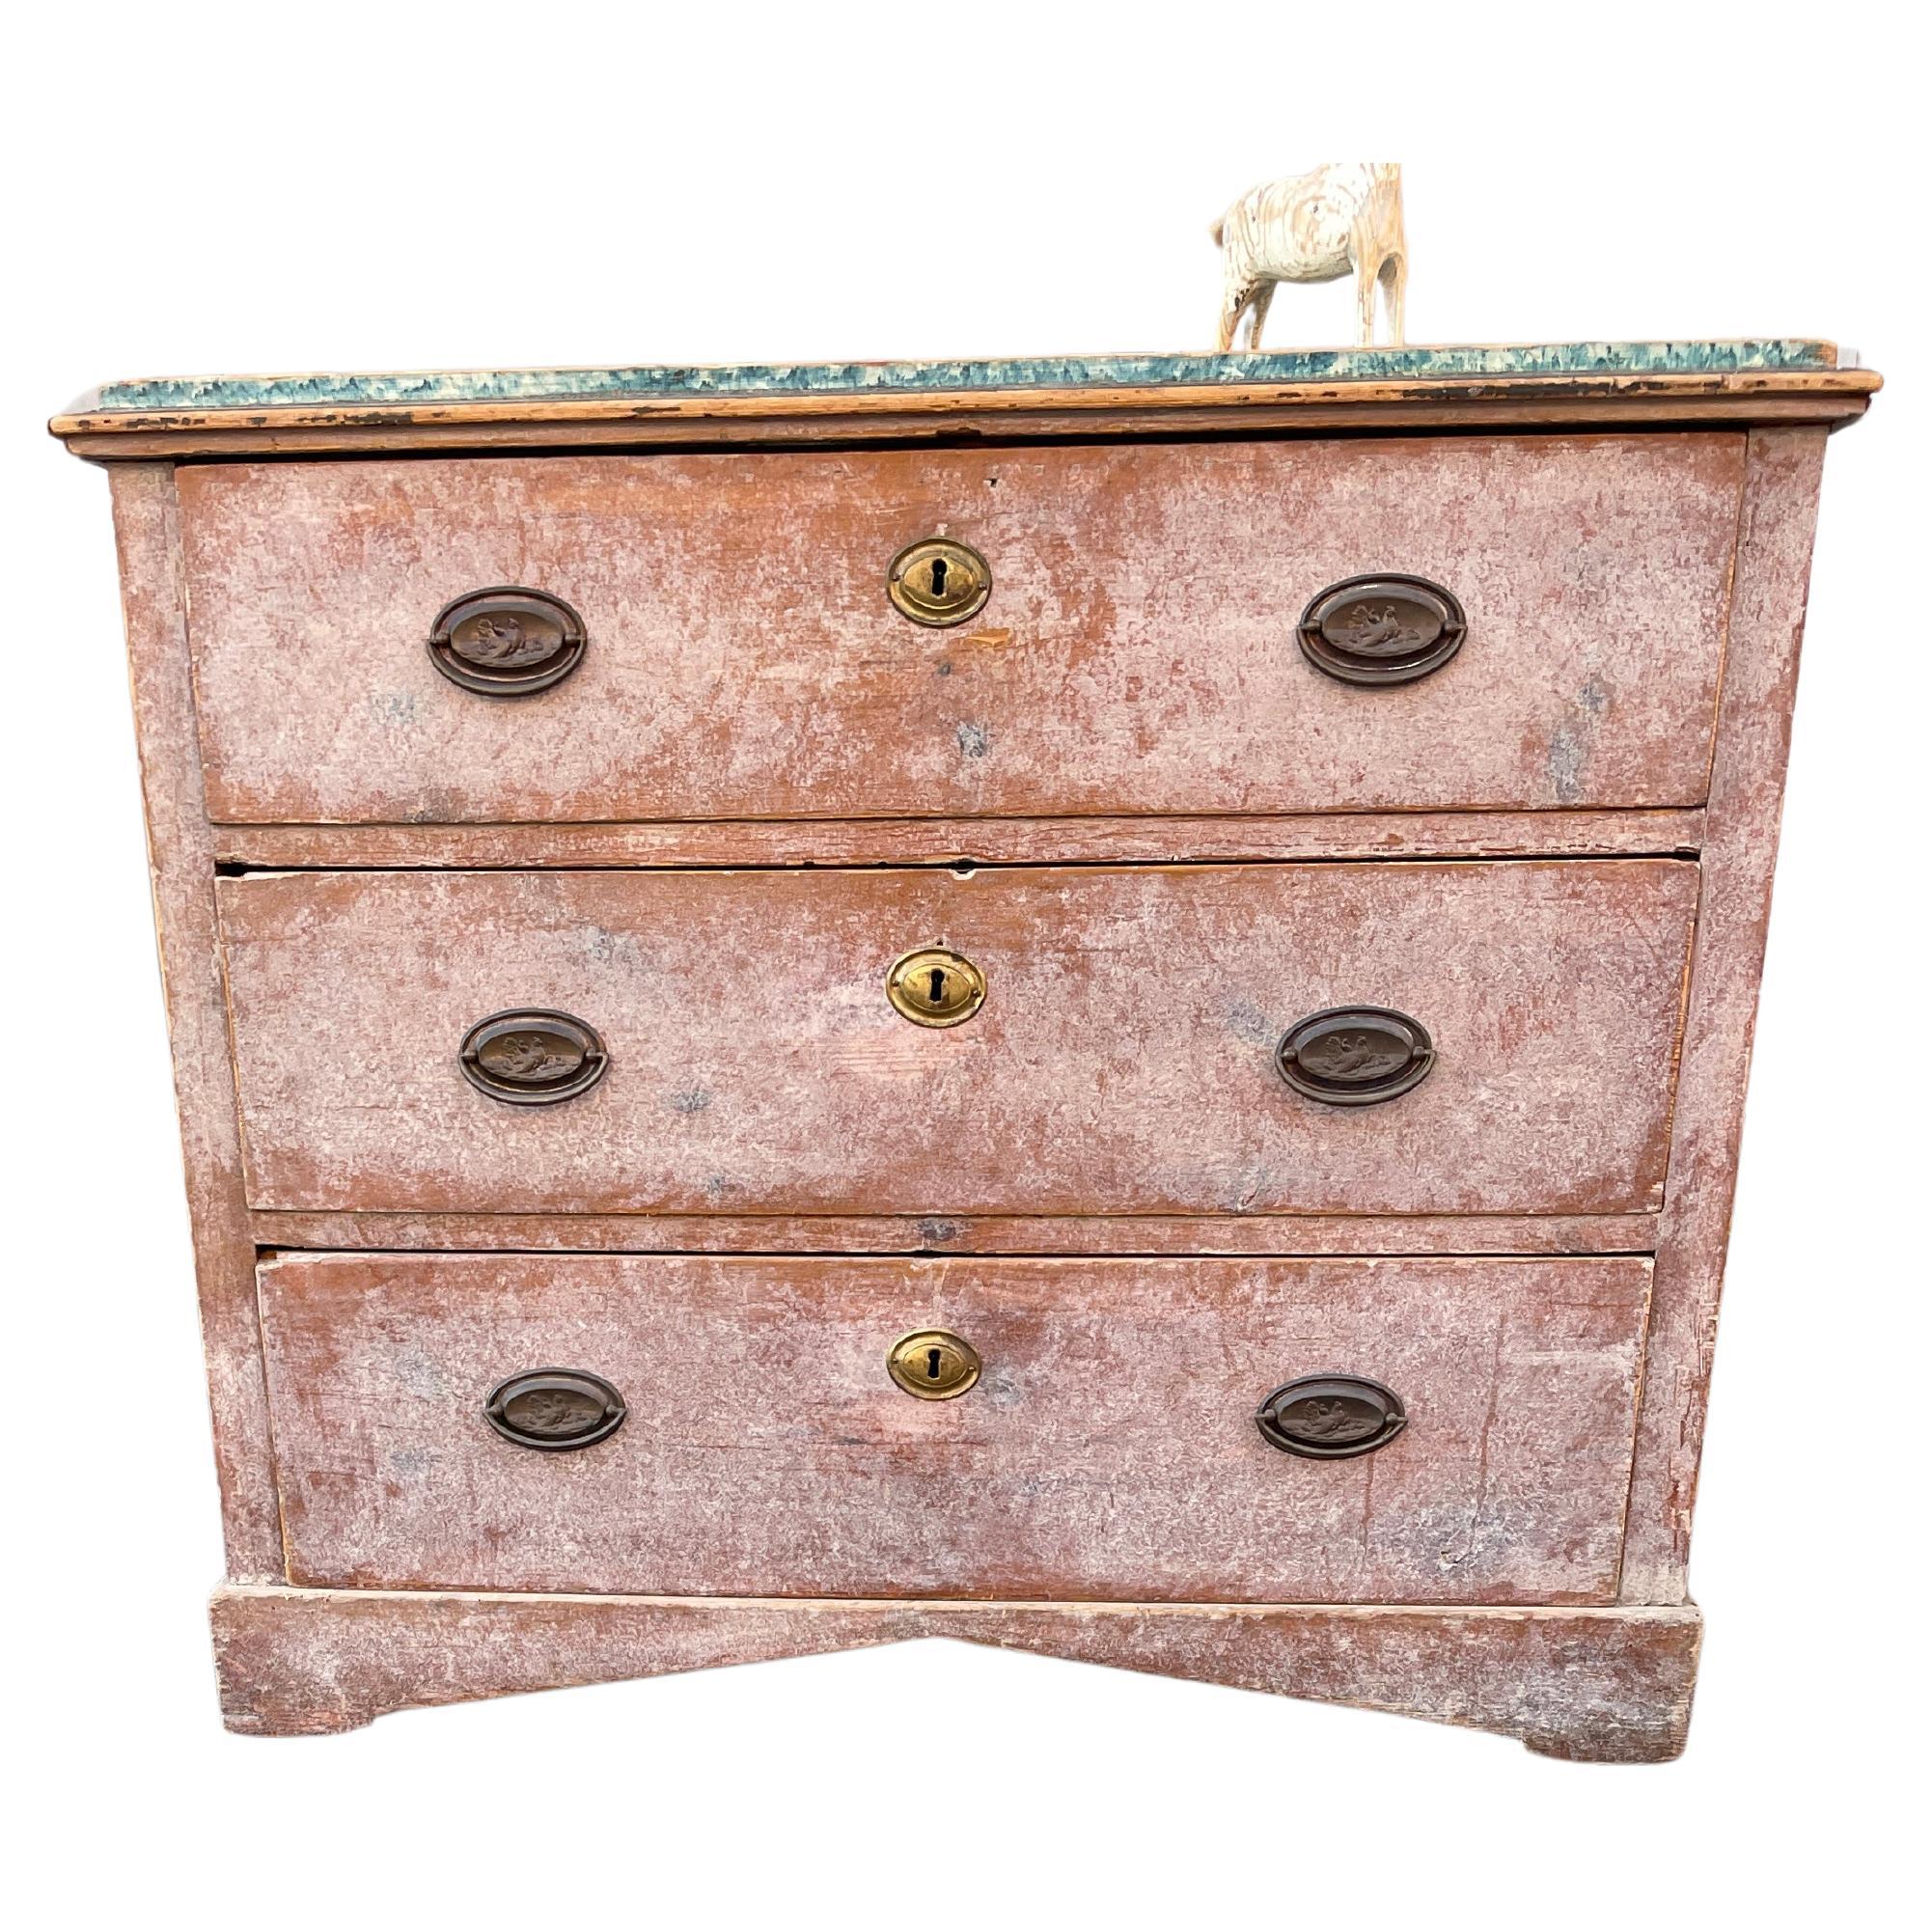 Hand-Painted Early 19th Century Empire Chest with Painted Faux Marble Top For Sale